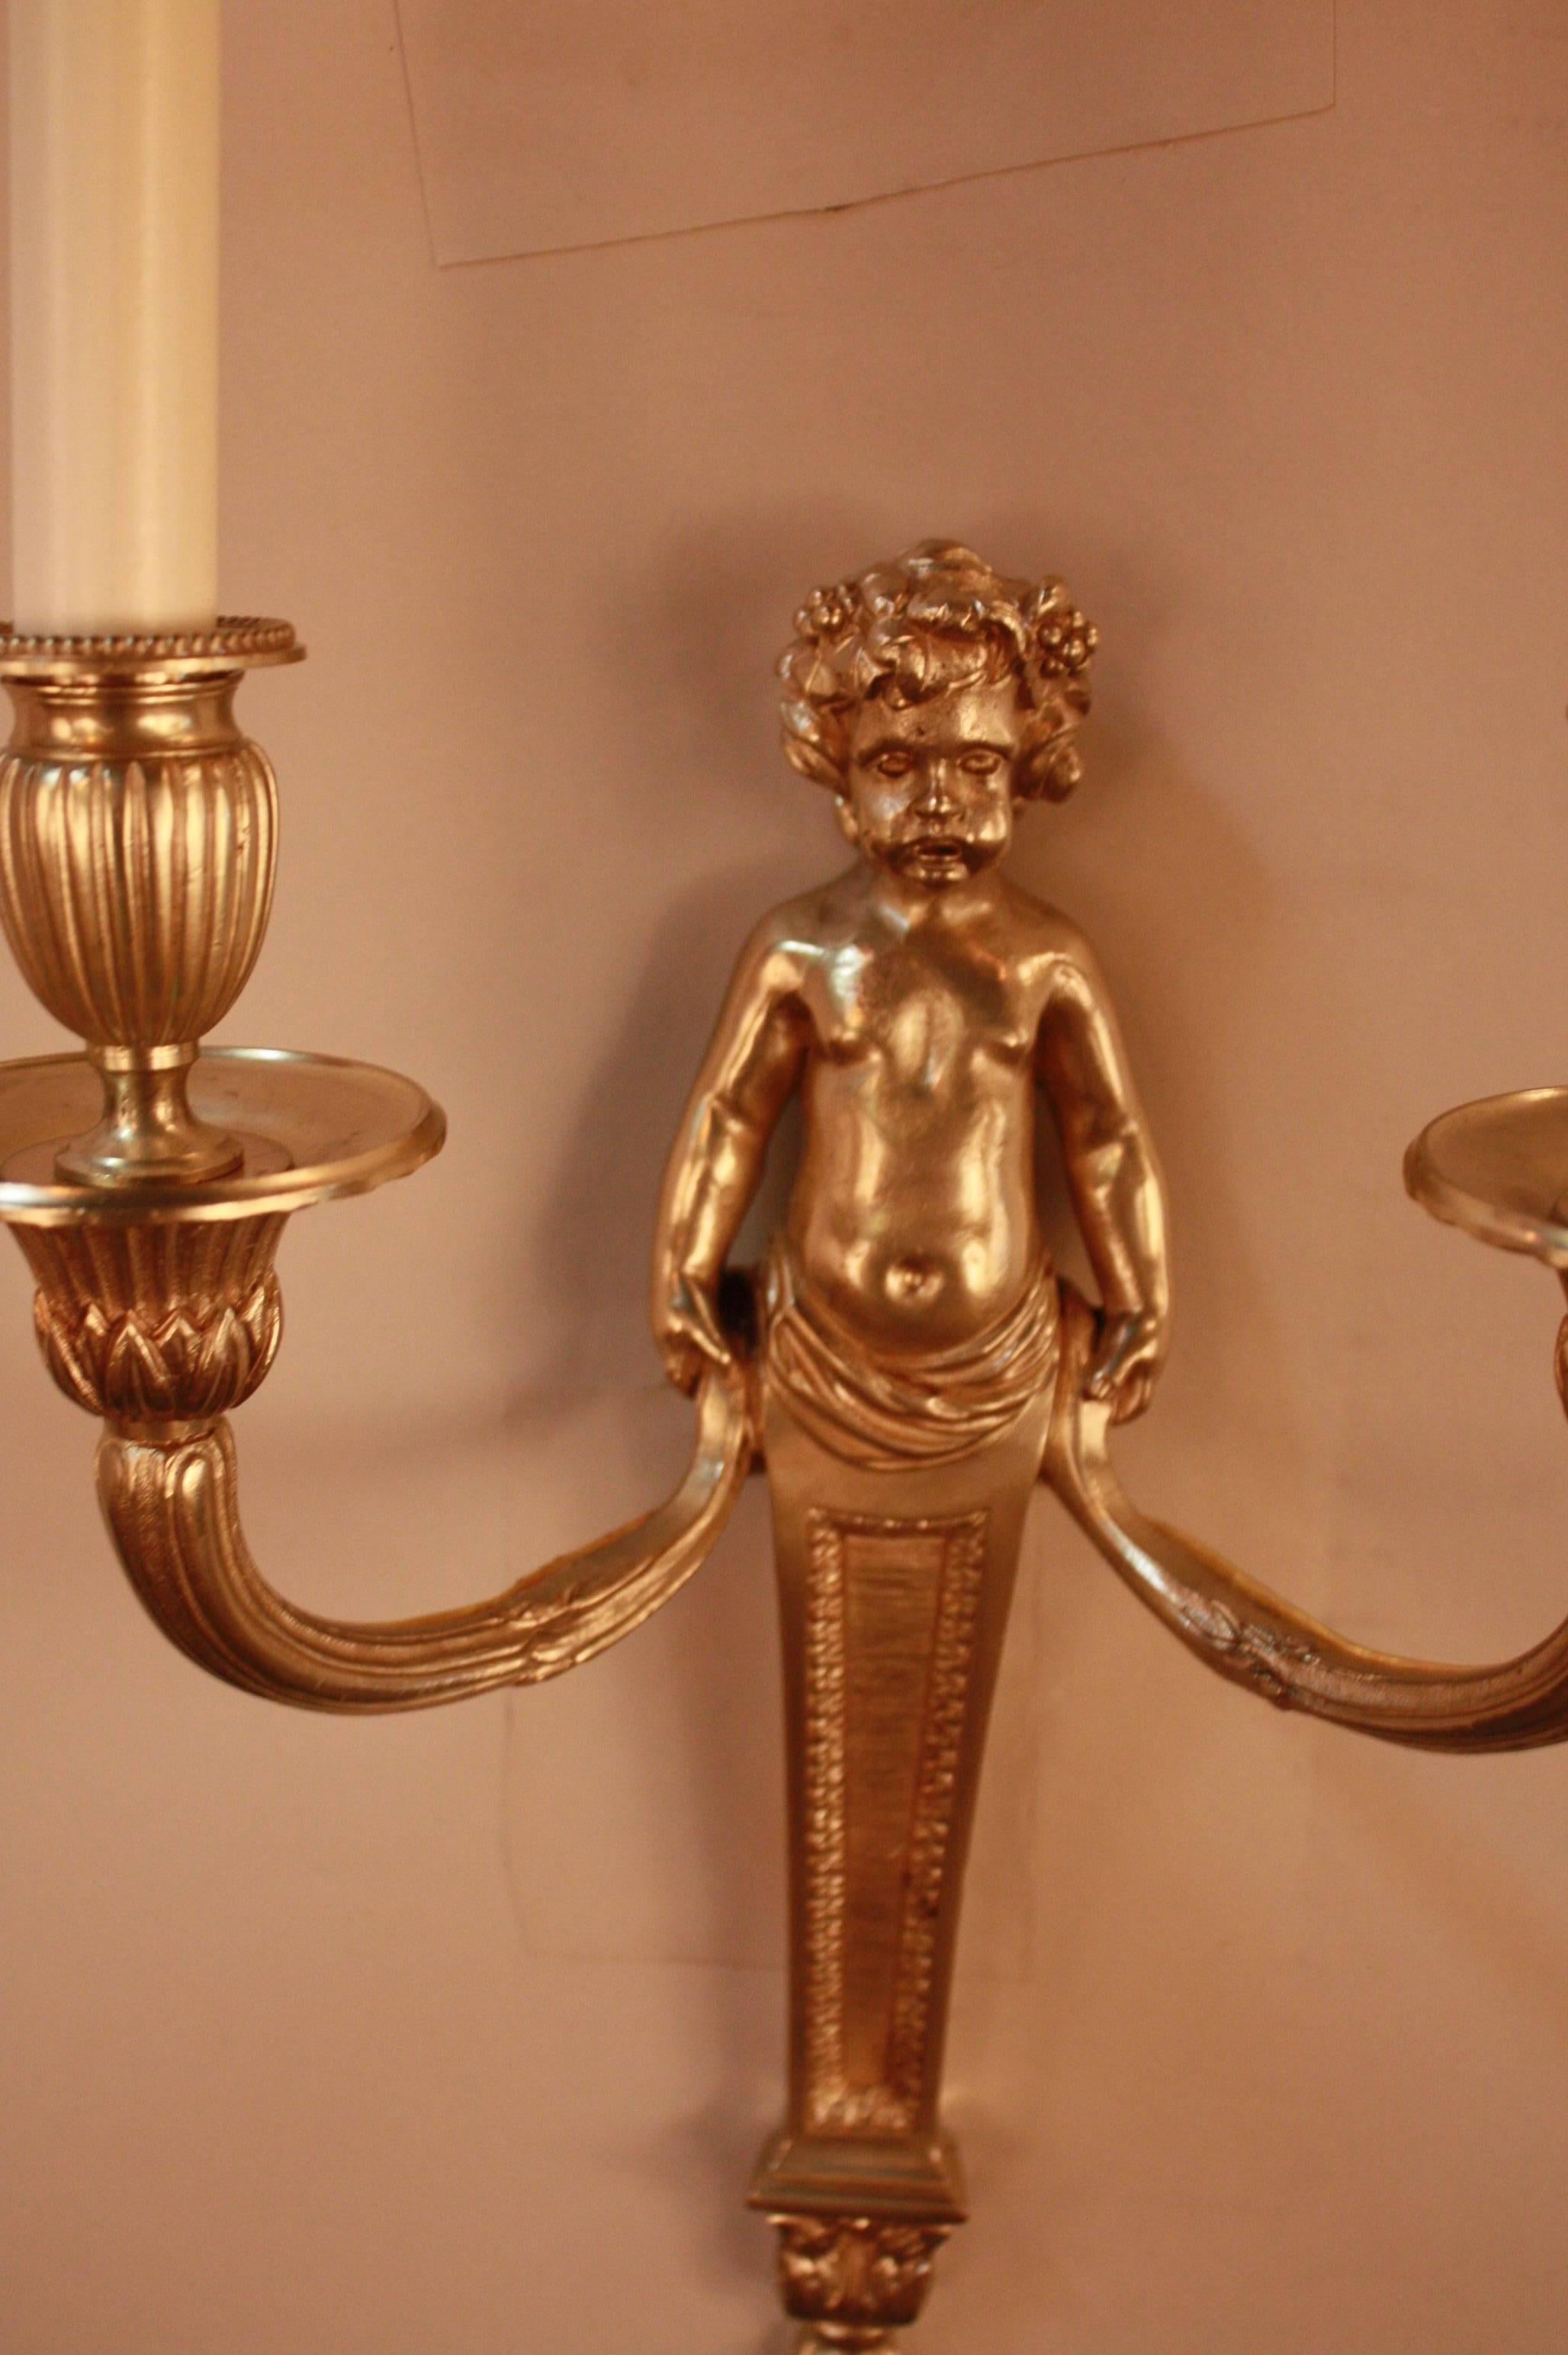 Elegant double-arm bronze wall sconces with putto holding the arms.